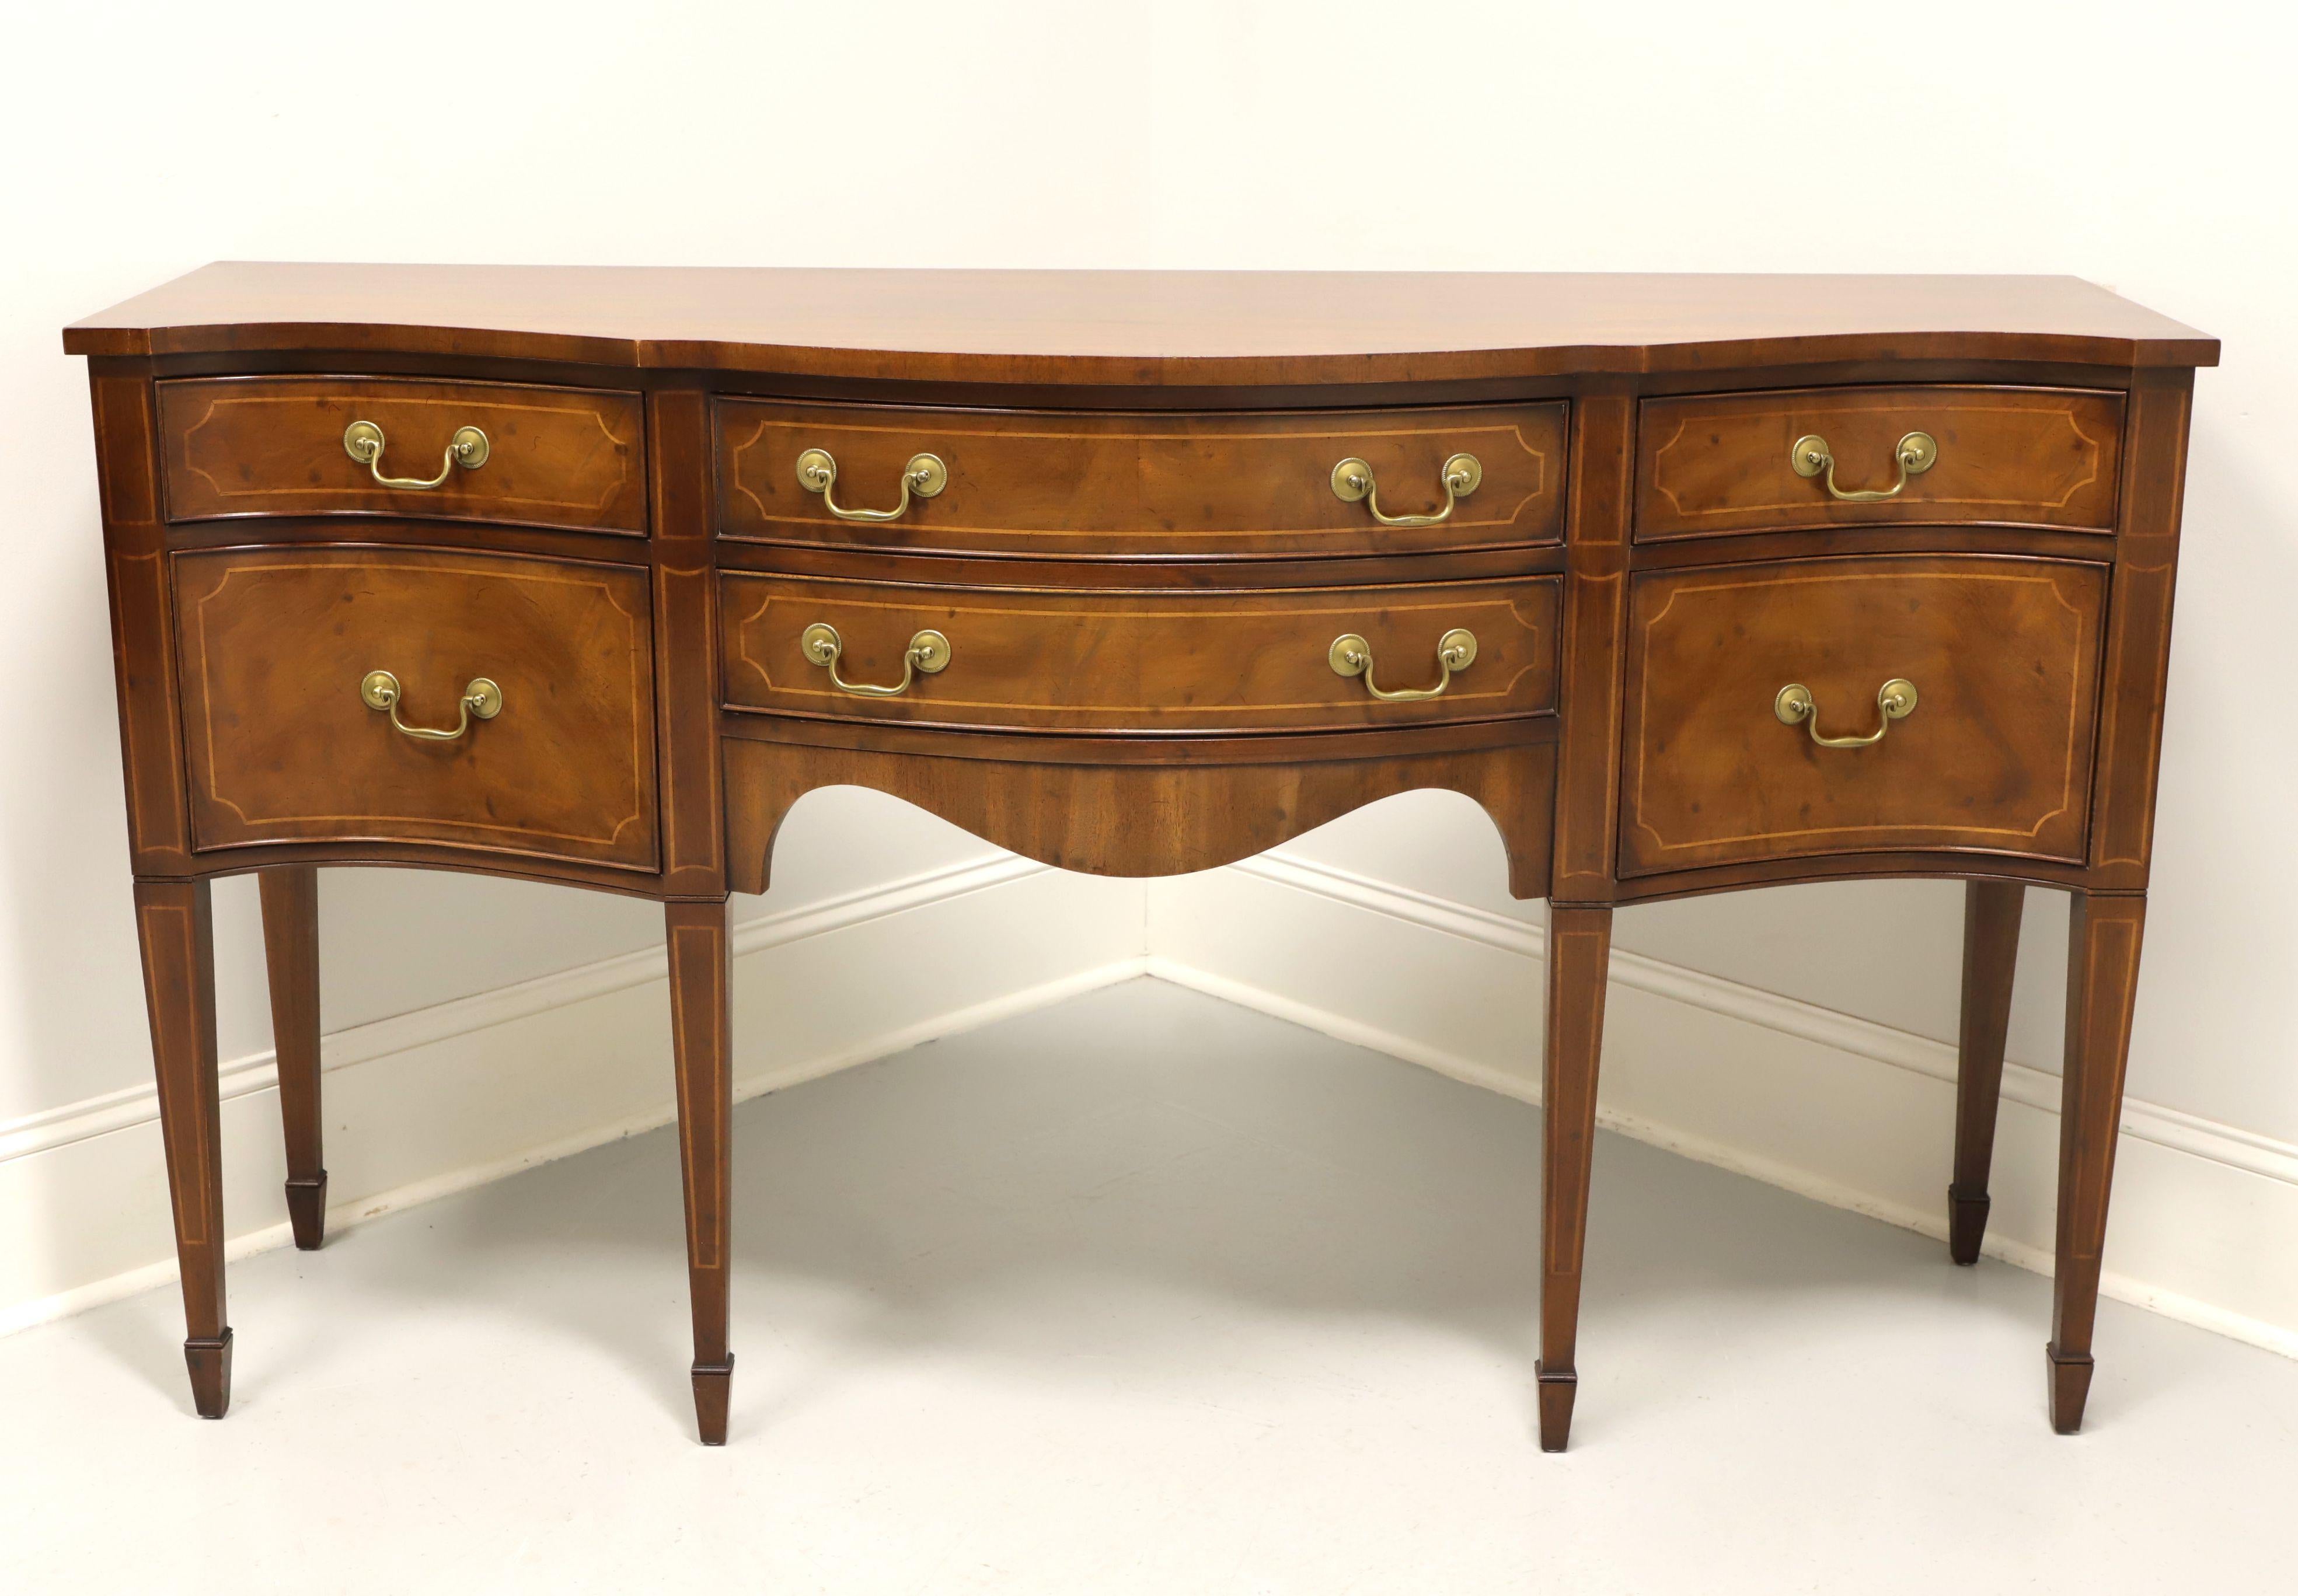 A vintage Hepplewhite style sideboard by Morganton Furniture, from their Tidewater Collection. Mahogany with string inlay to drawer fronts & legs, serpentine front, brass hardware, tapered straight legs and spade feet. Features two larger center